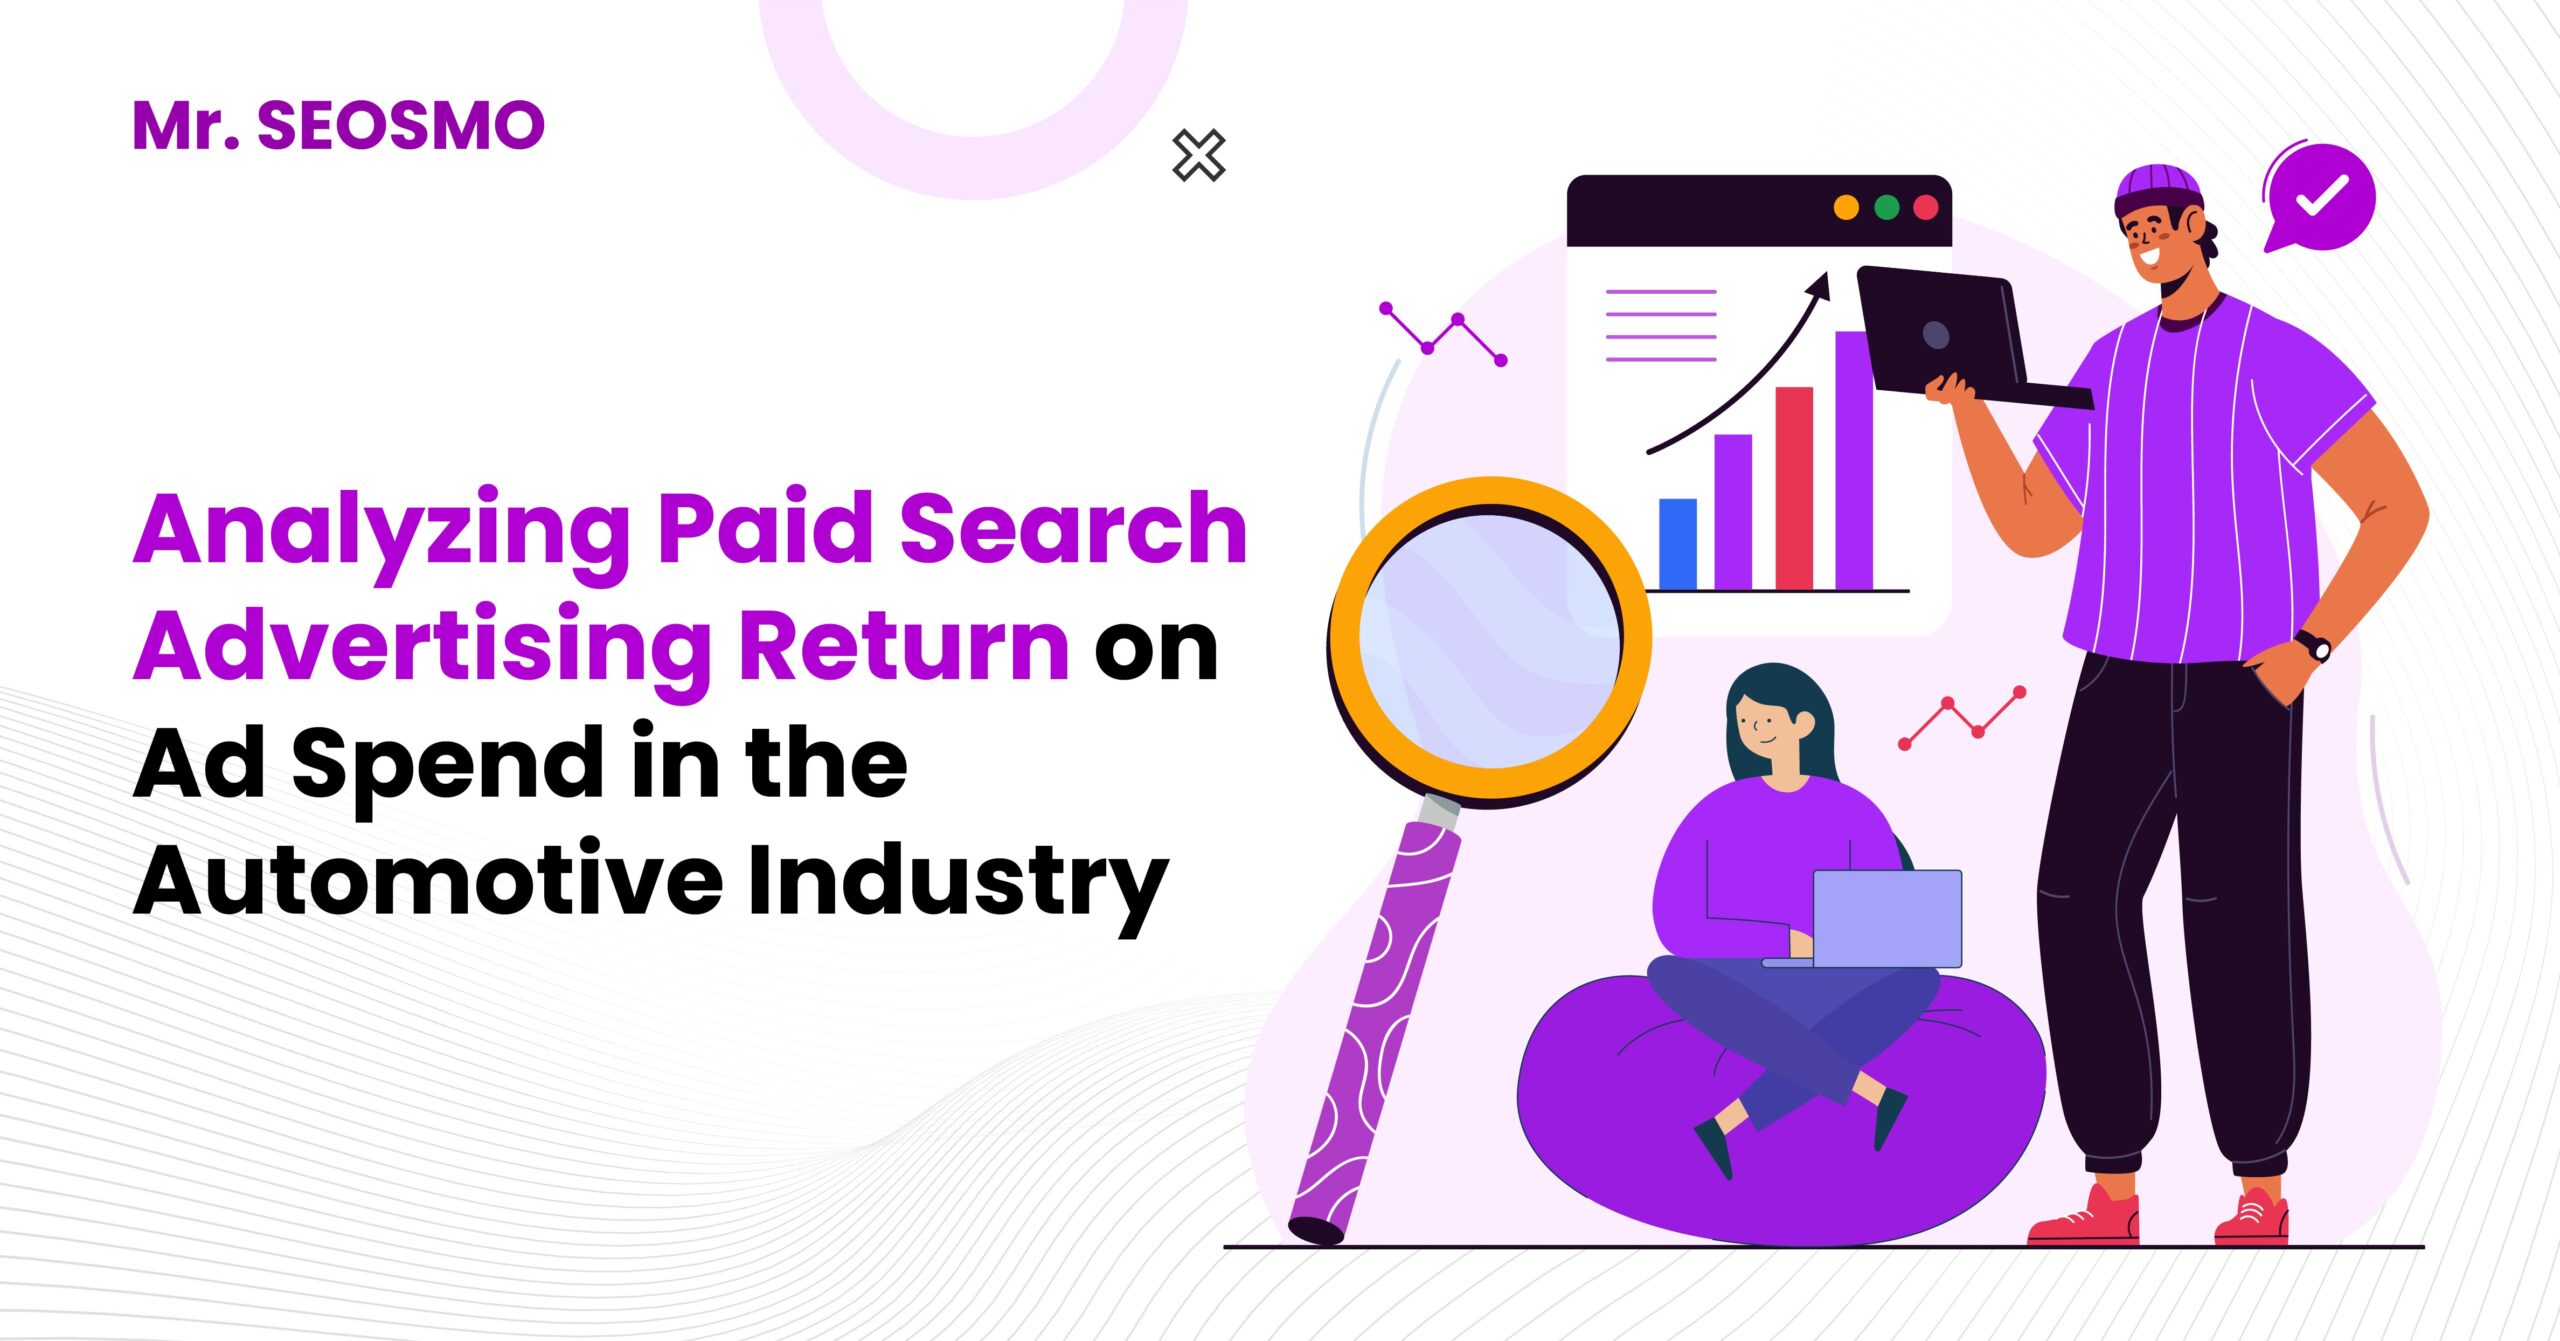 Analyzing Paid Search Advertising Return on Ad Spend in the Automotive Industry